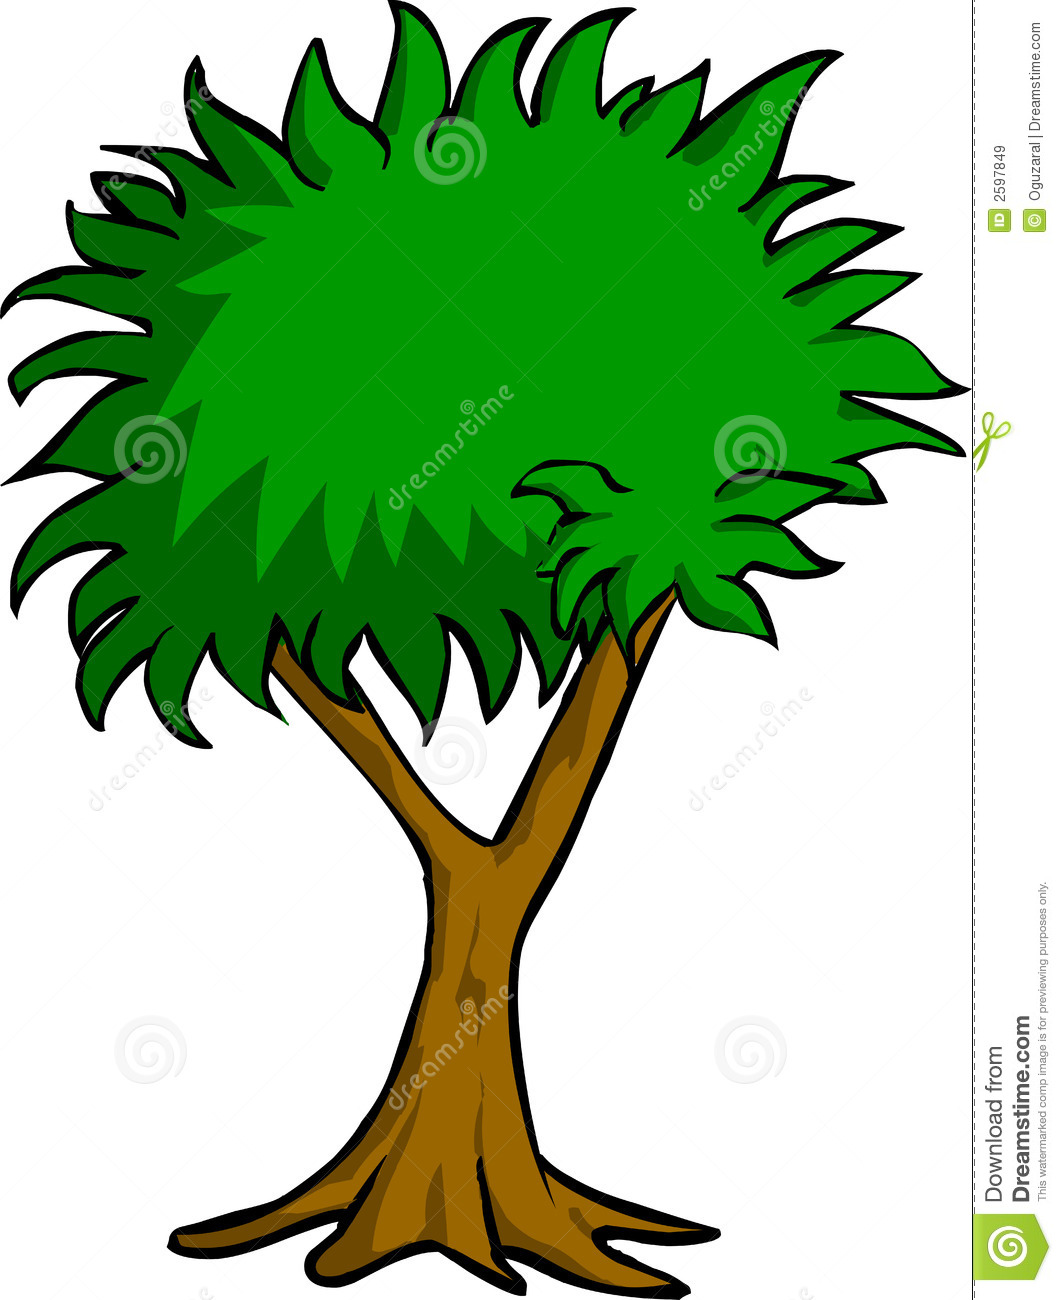 Tree Royalty Free Stock Images   Image  2597849